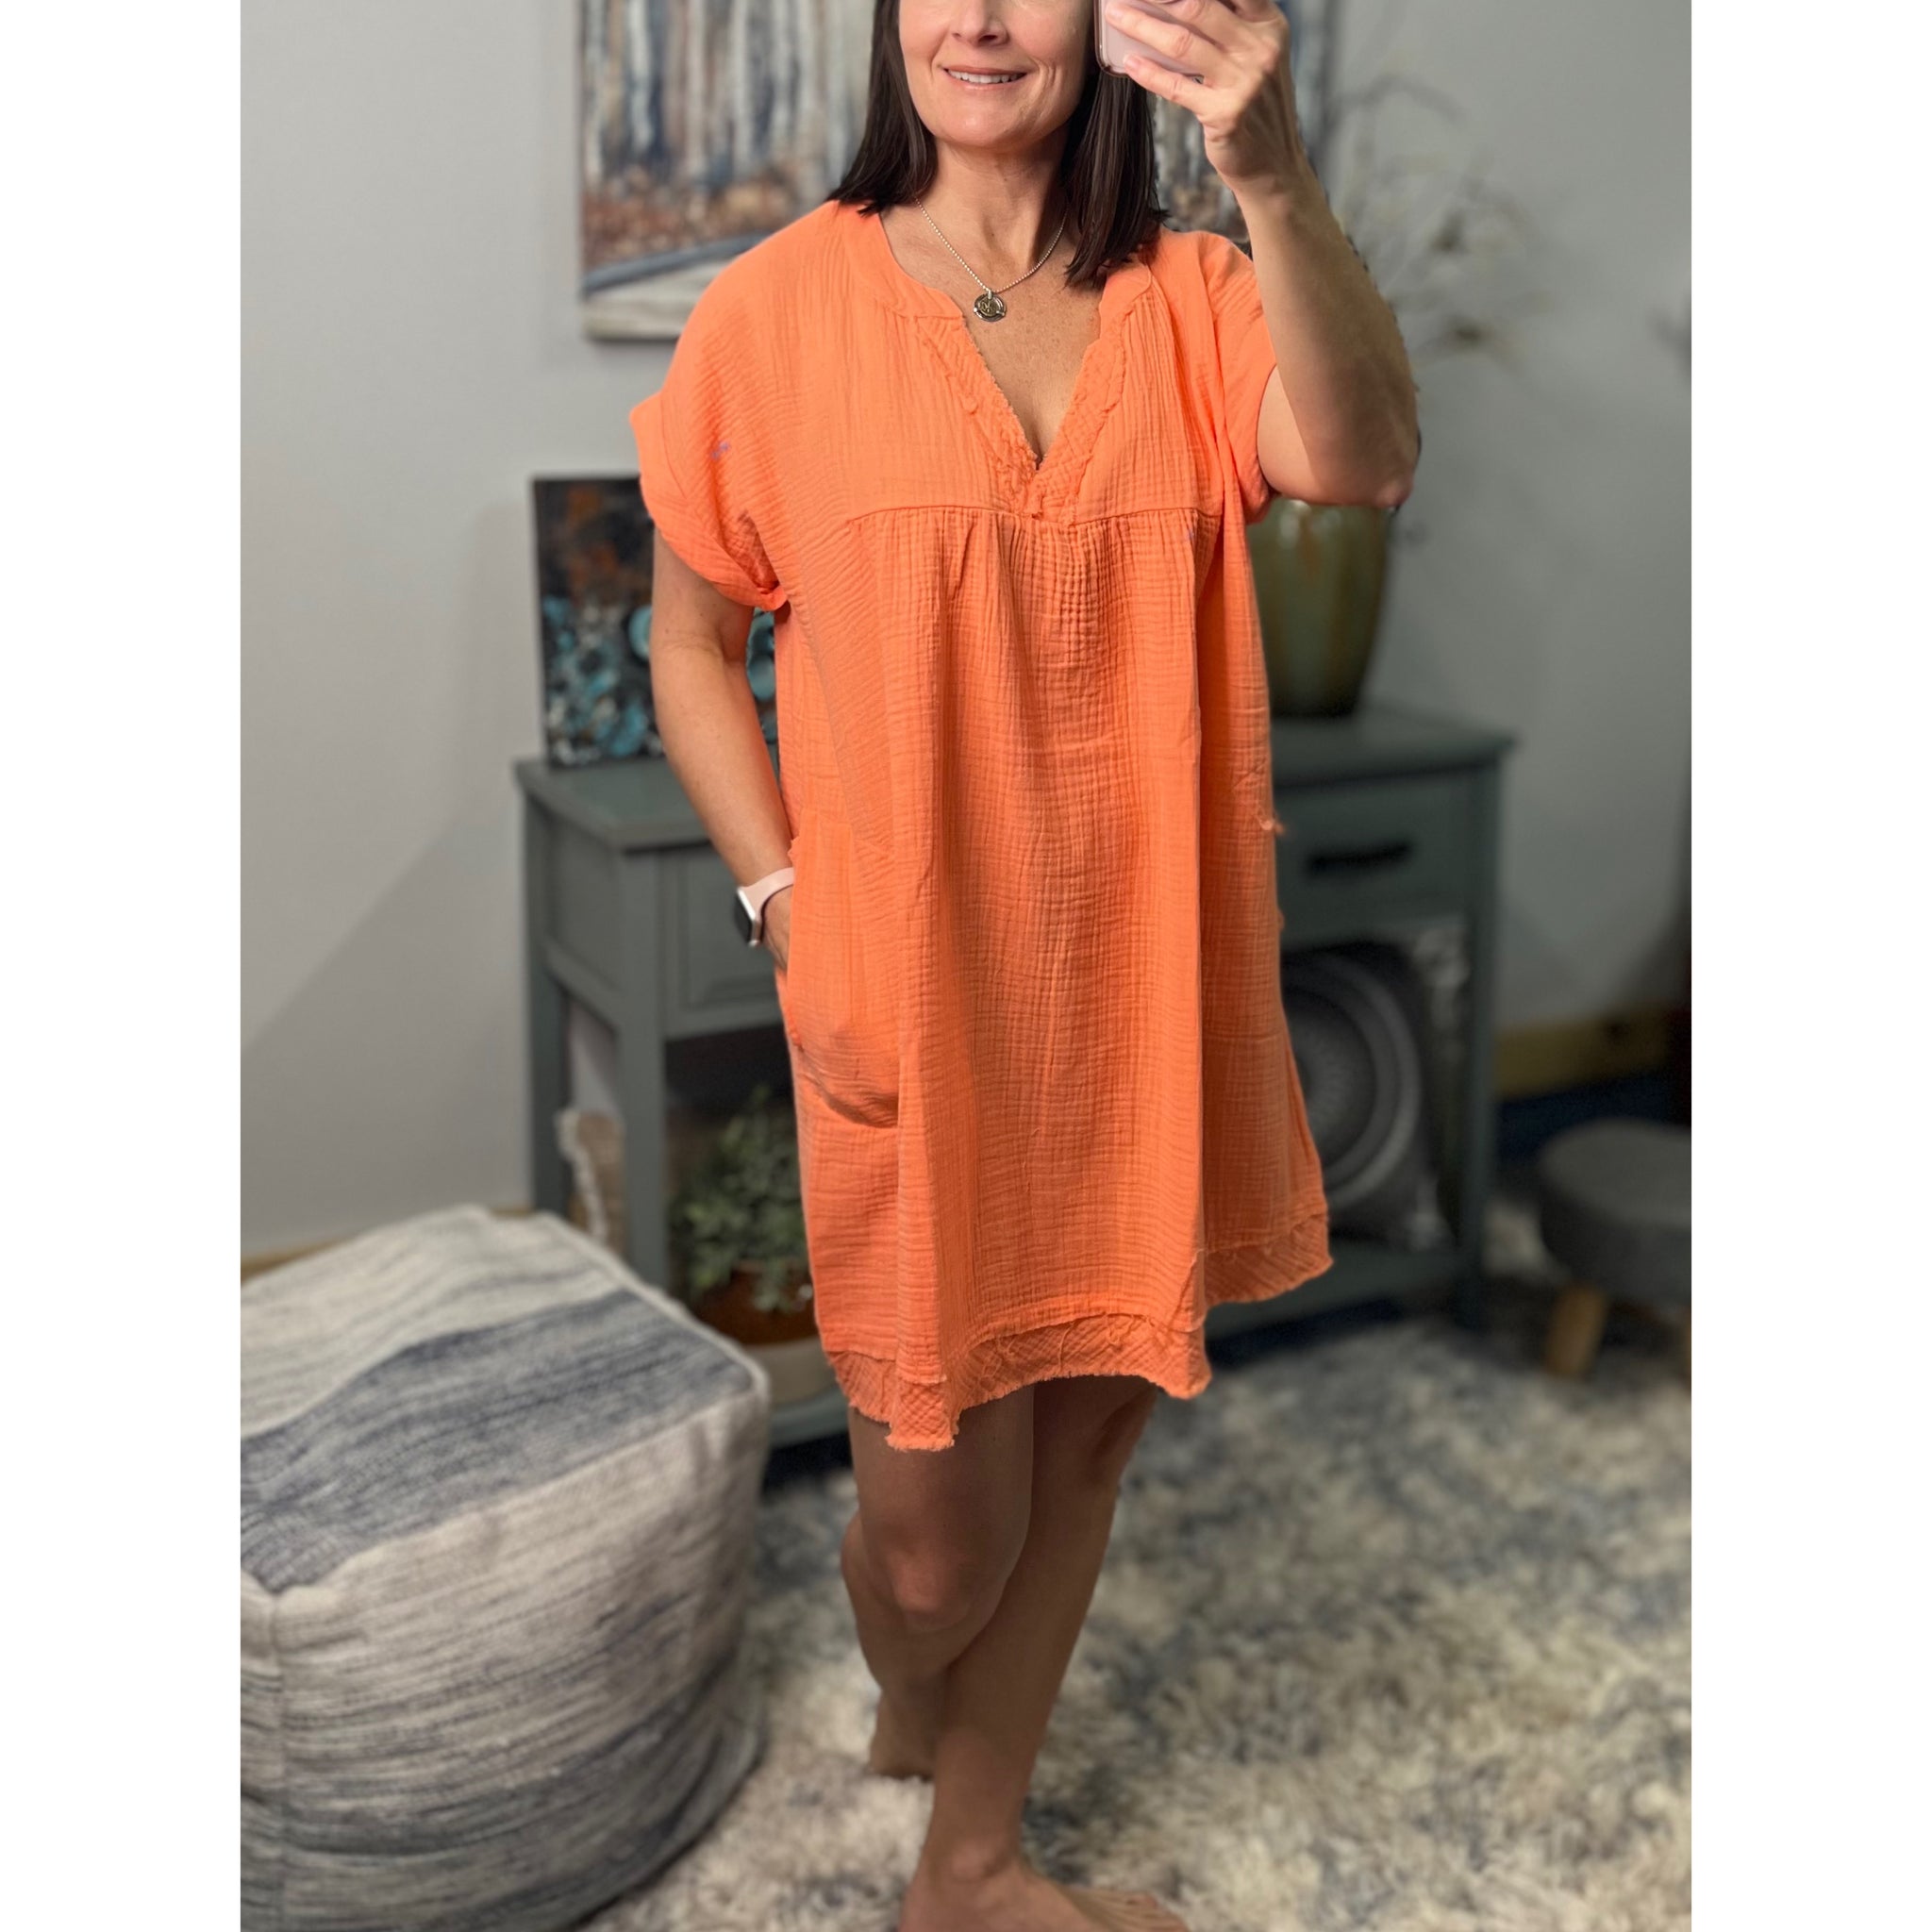 "Breezy Babe" Gauze V Neck A Line Rolled Short Sleeve Pockets Cotton Raw Edge Dress Coral